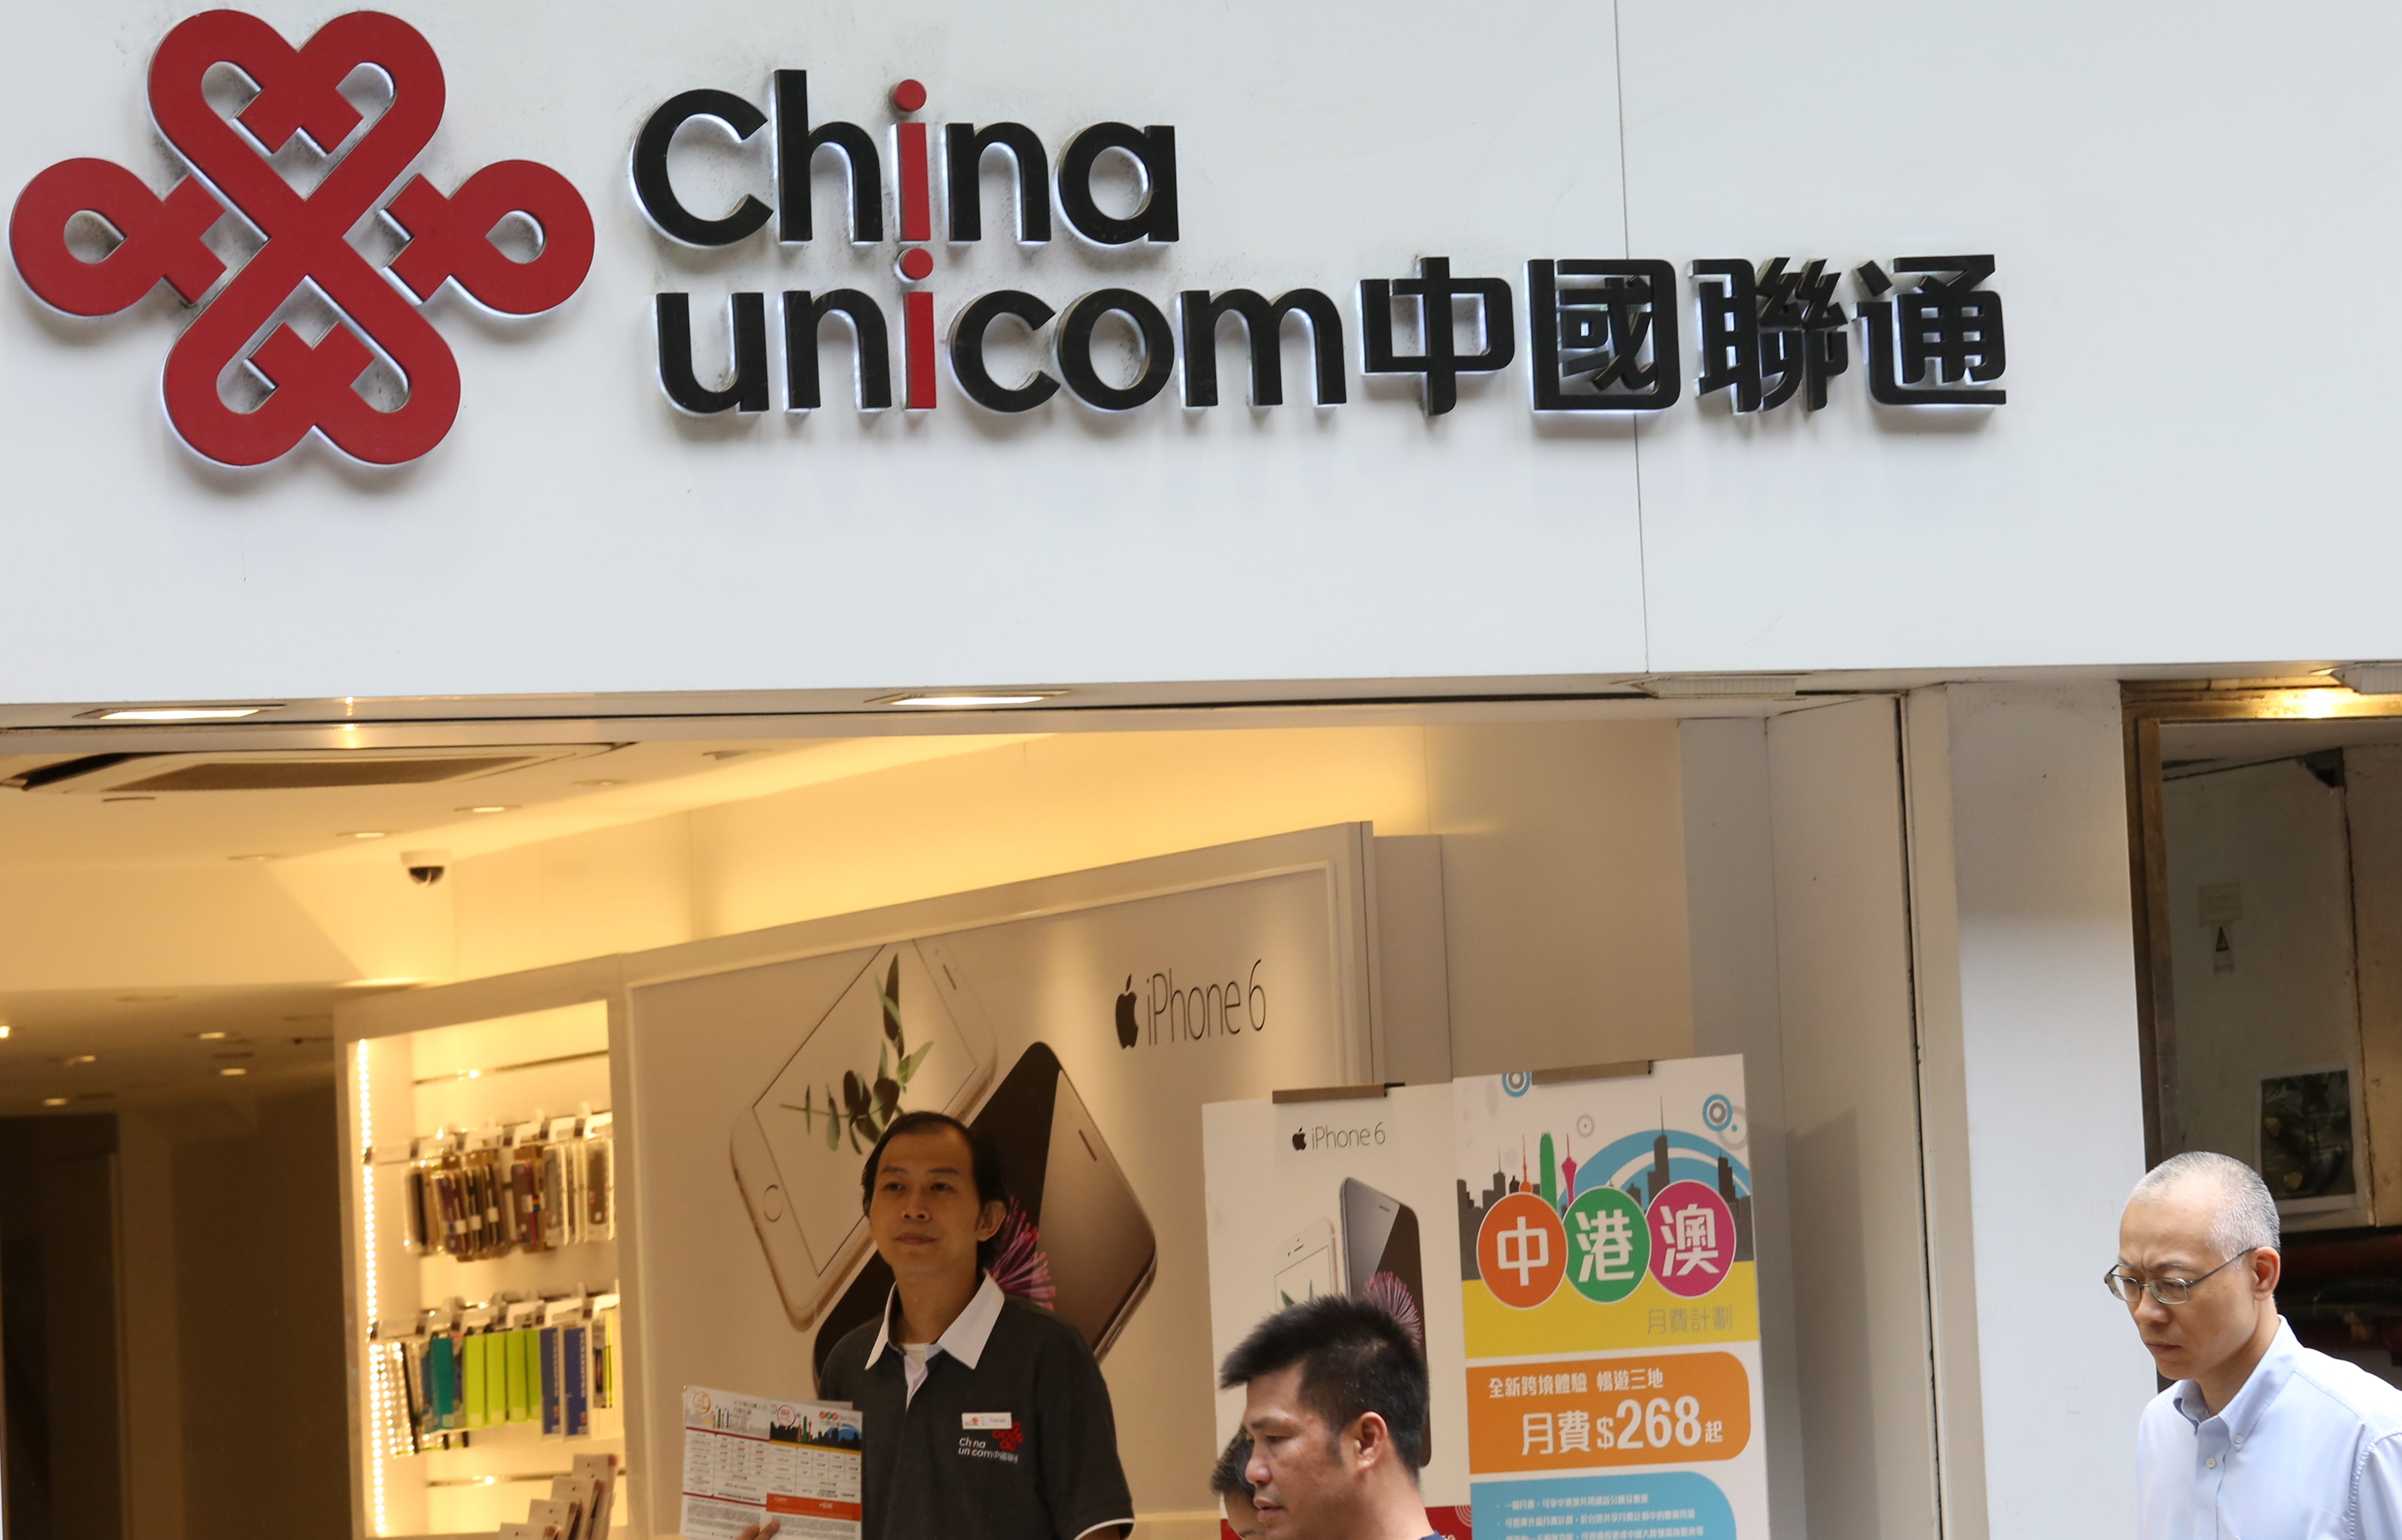 China Unicom store on Jubilee Street in Central. 31AUG15